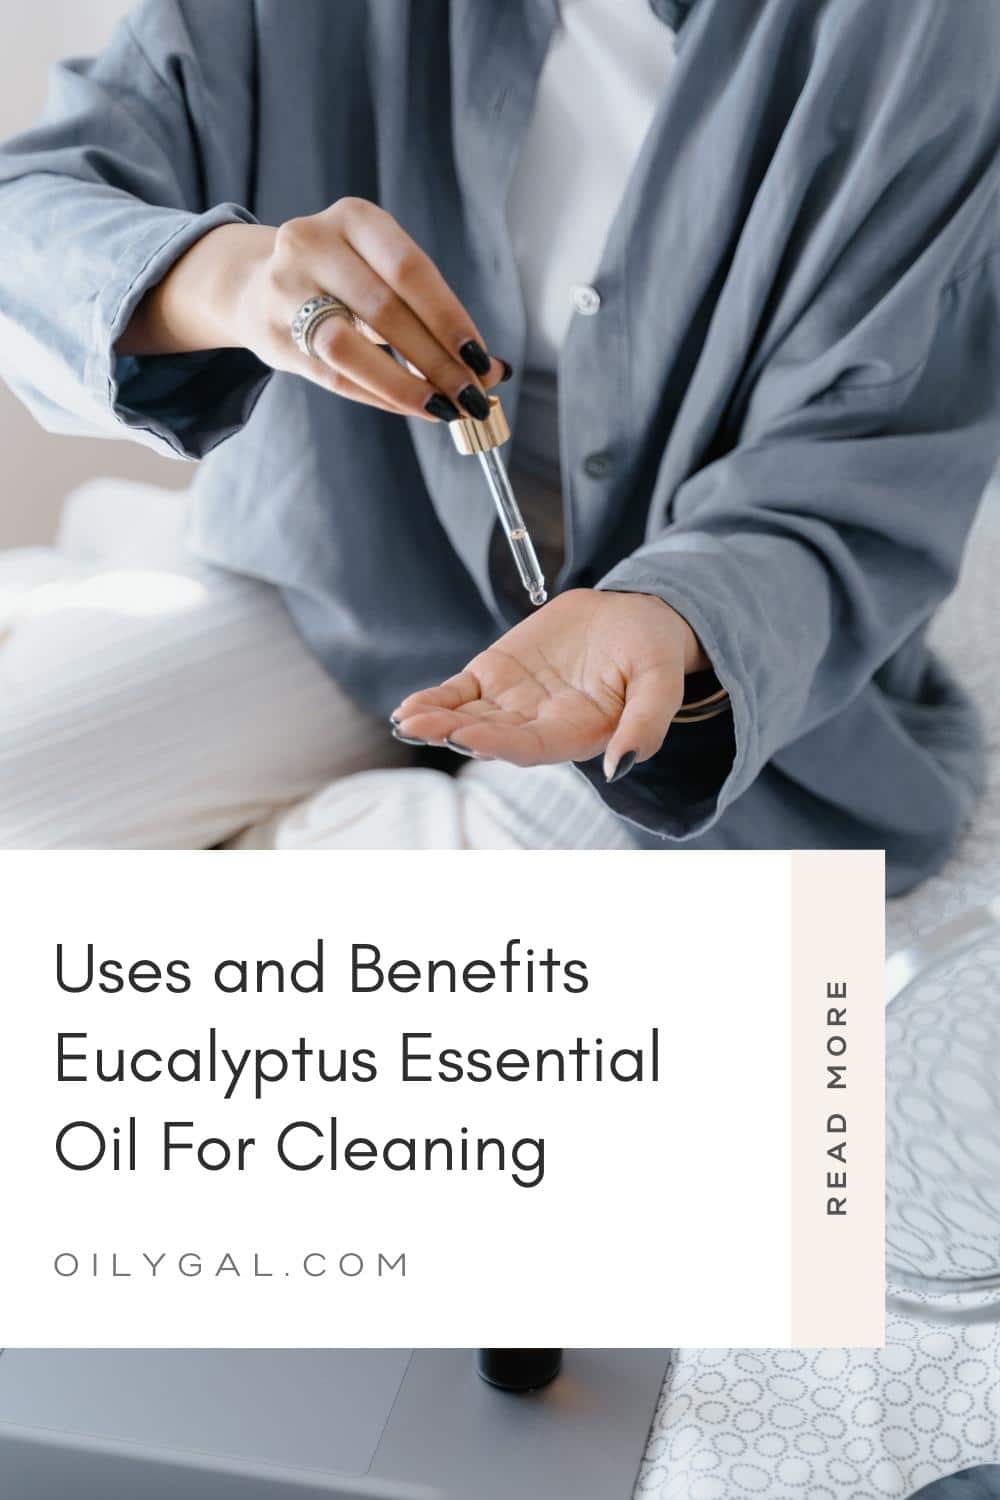 Eucalyptus essential oil for cleaning